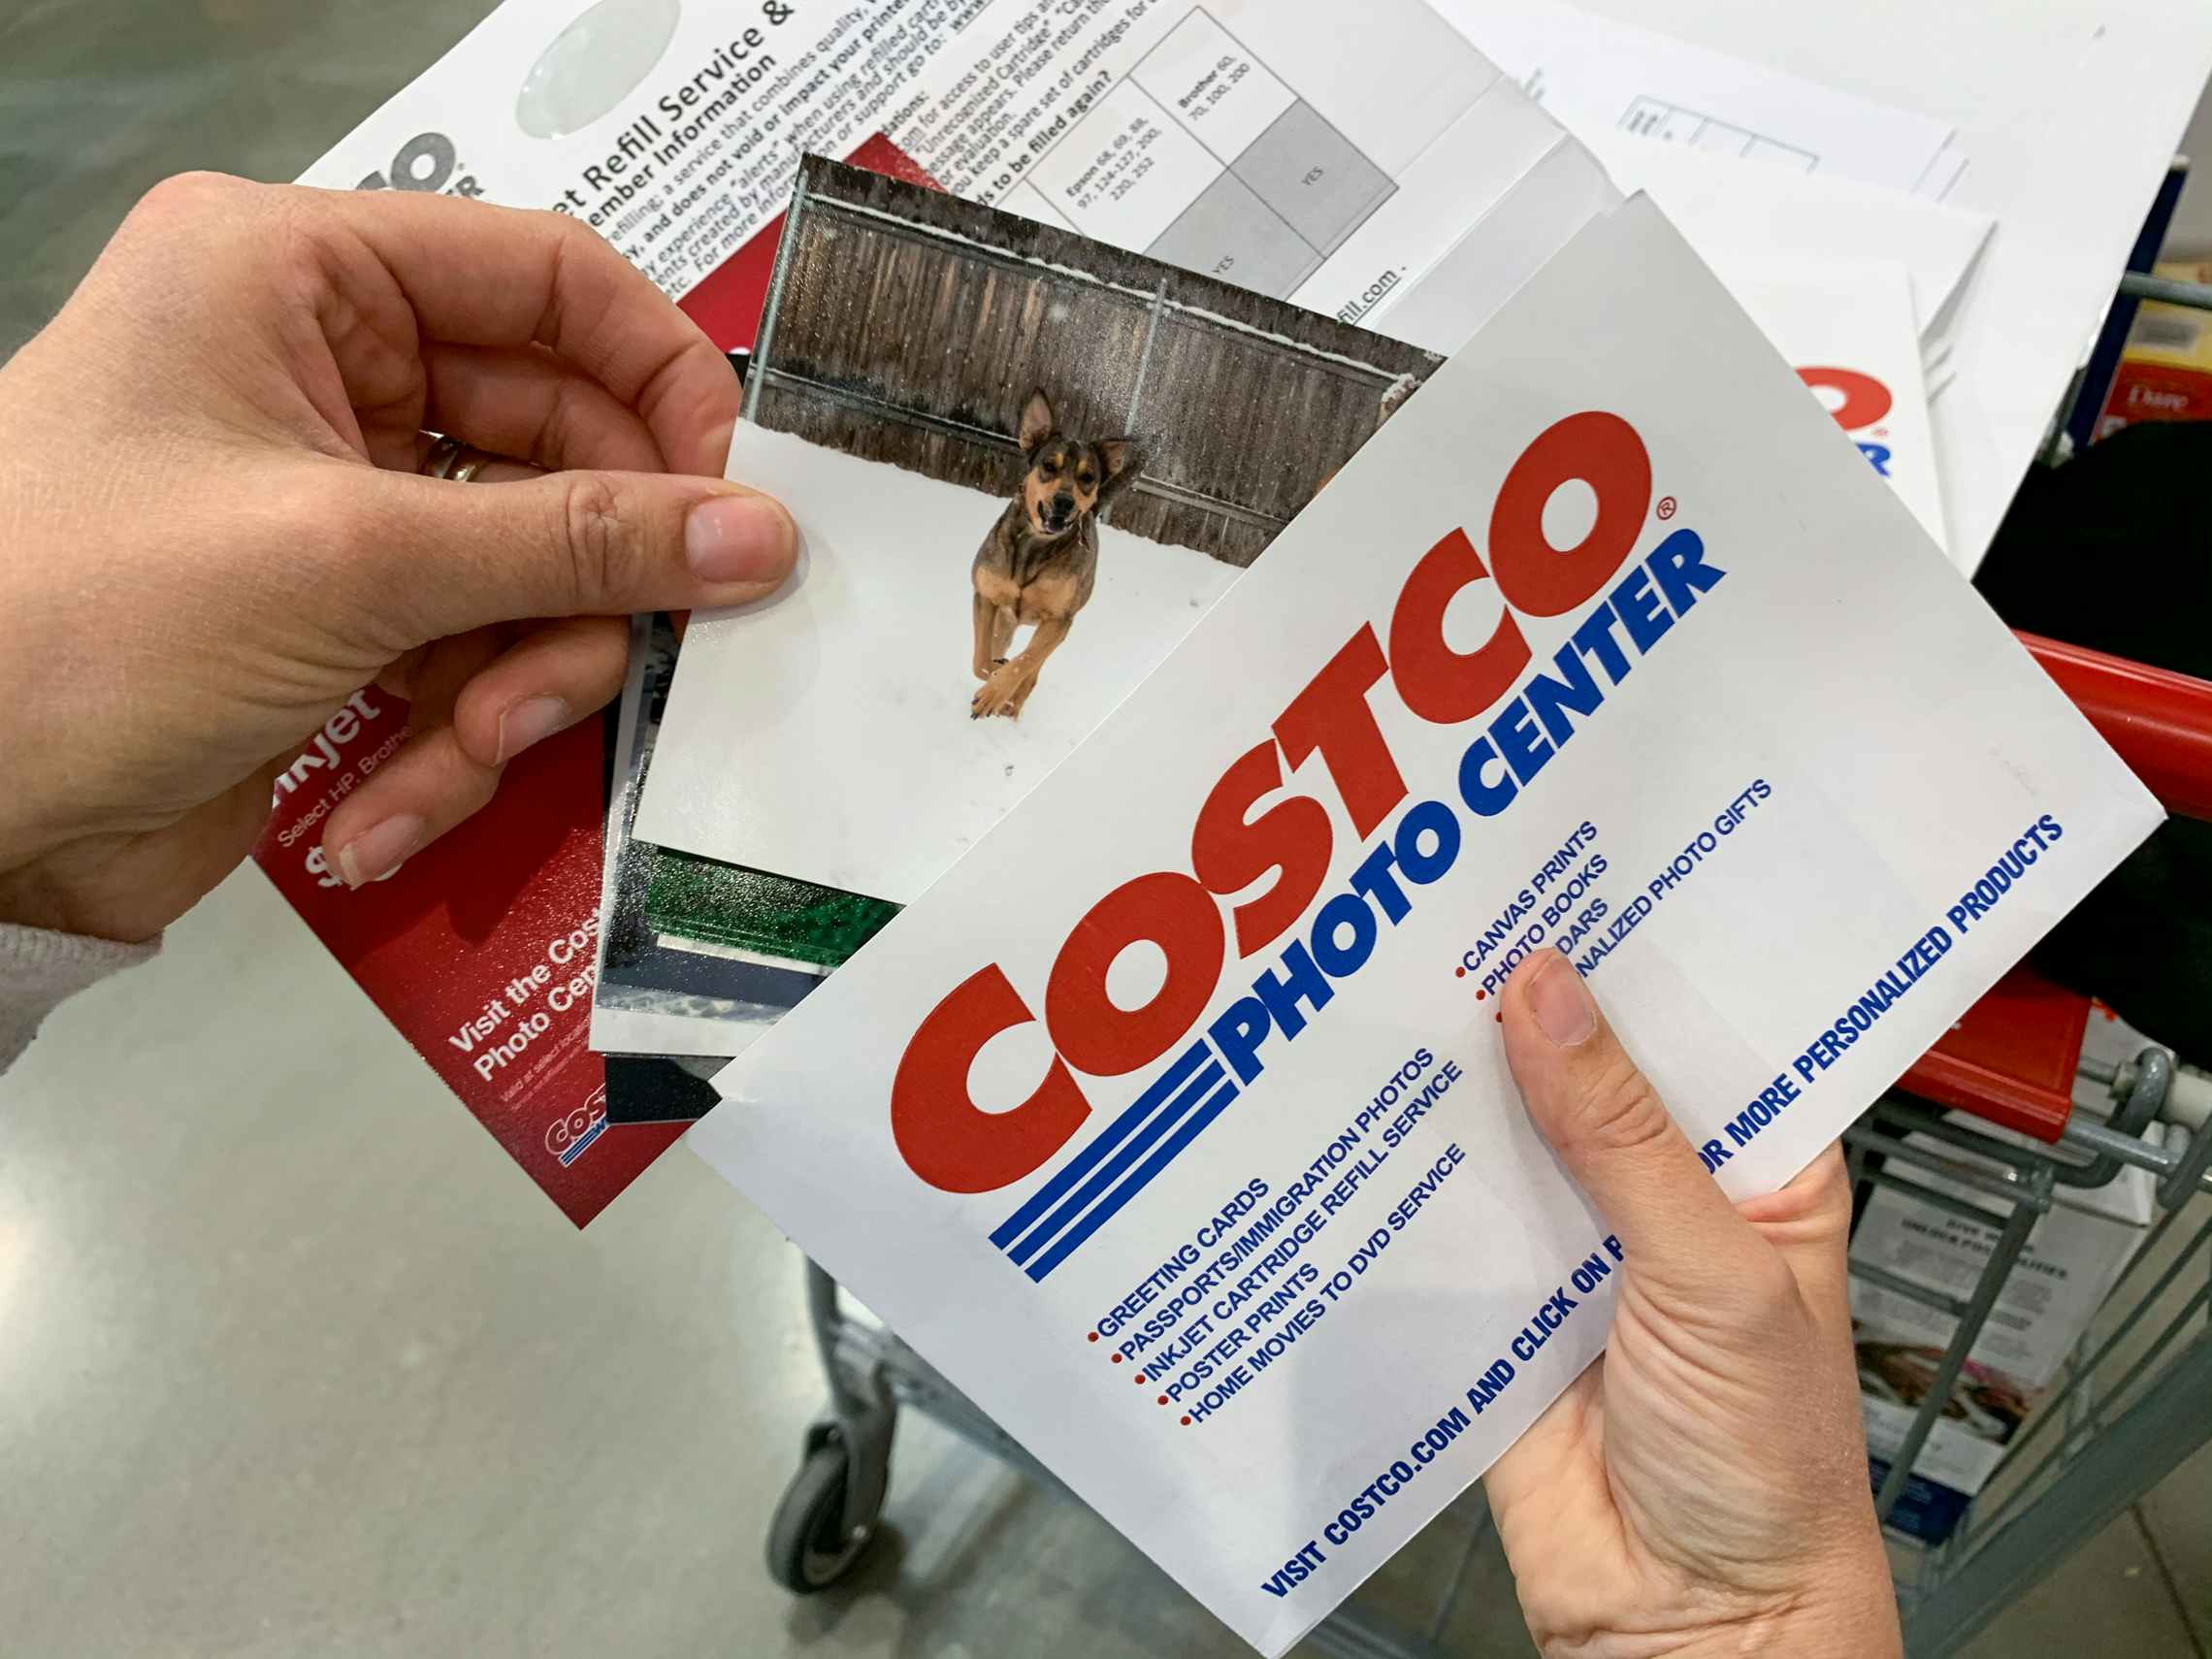 4x6 prints being pulled from a costco photo envelop.